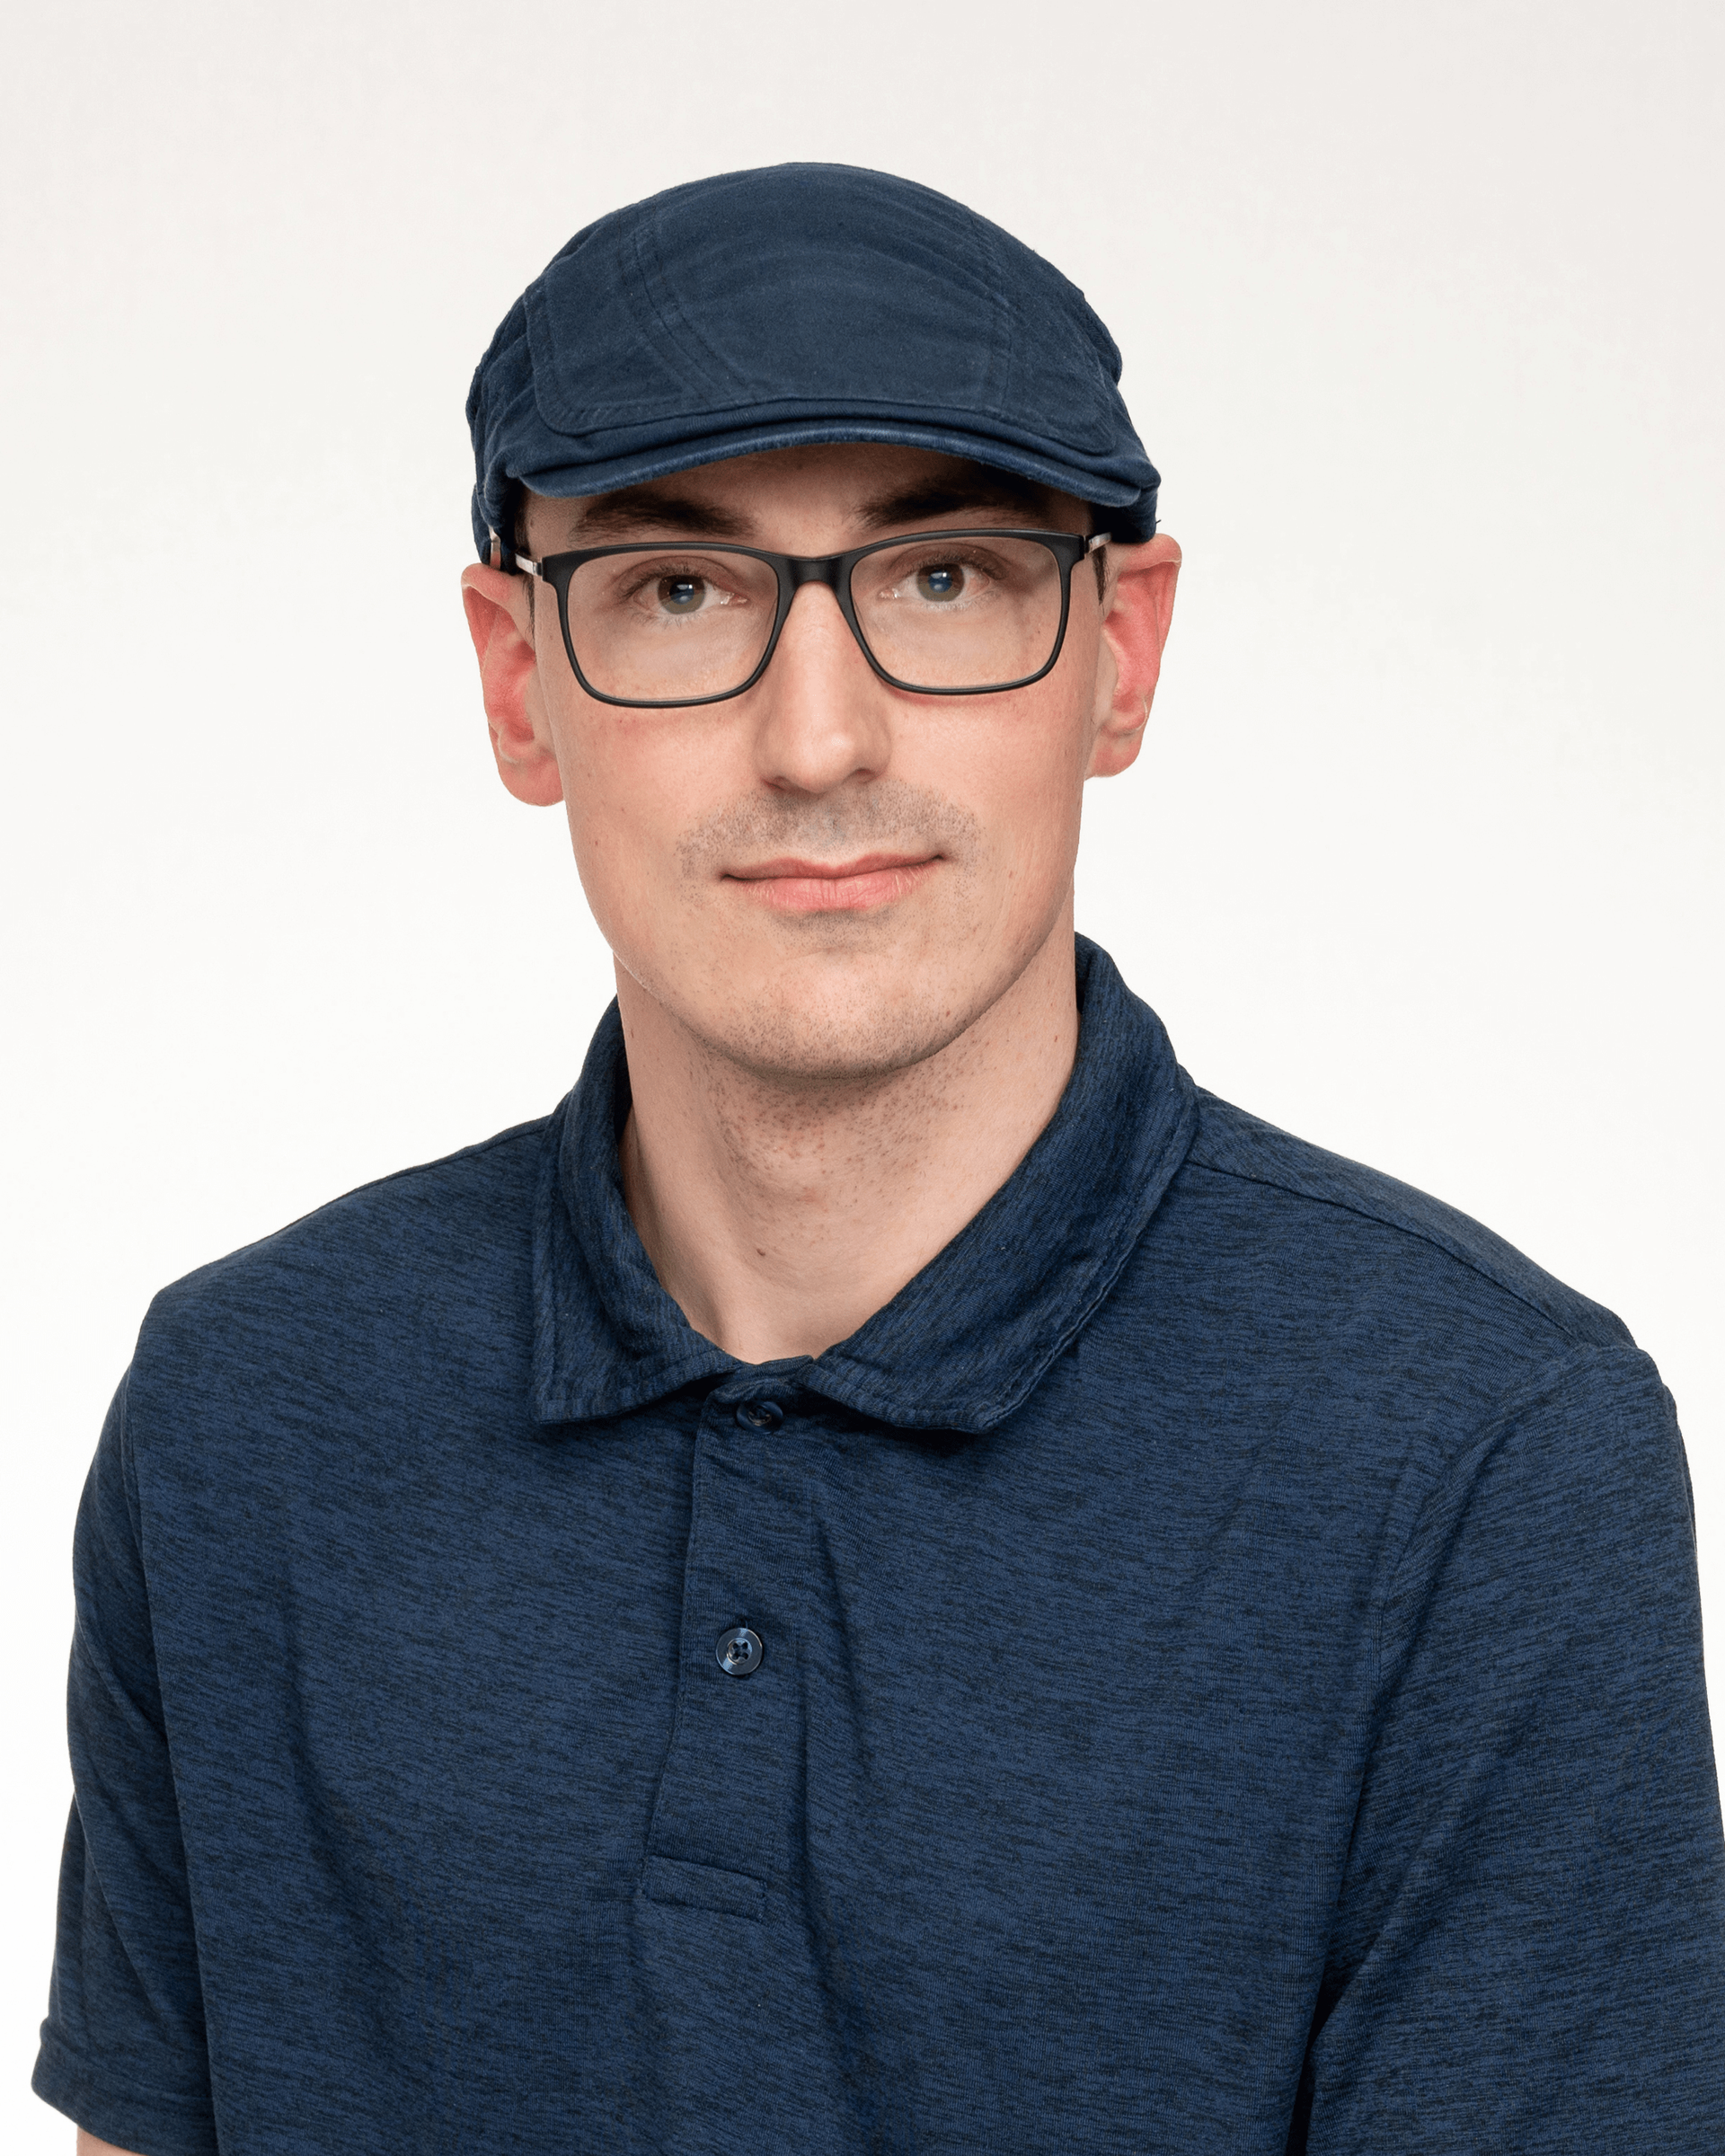 a man wearing glasses and a hat is standing in front of a white background .